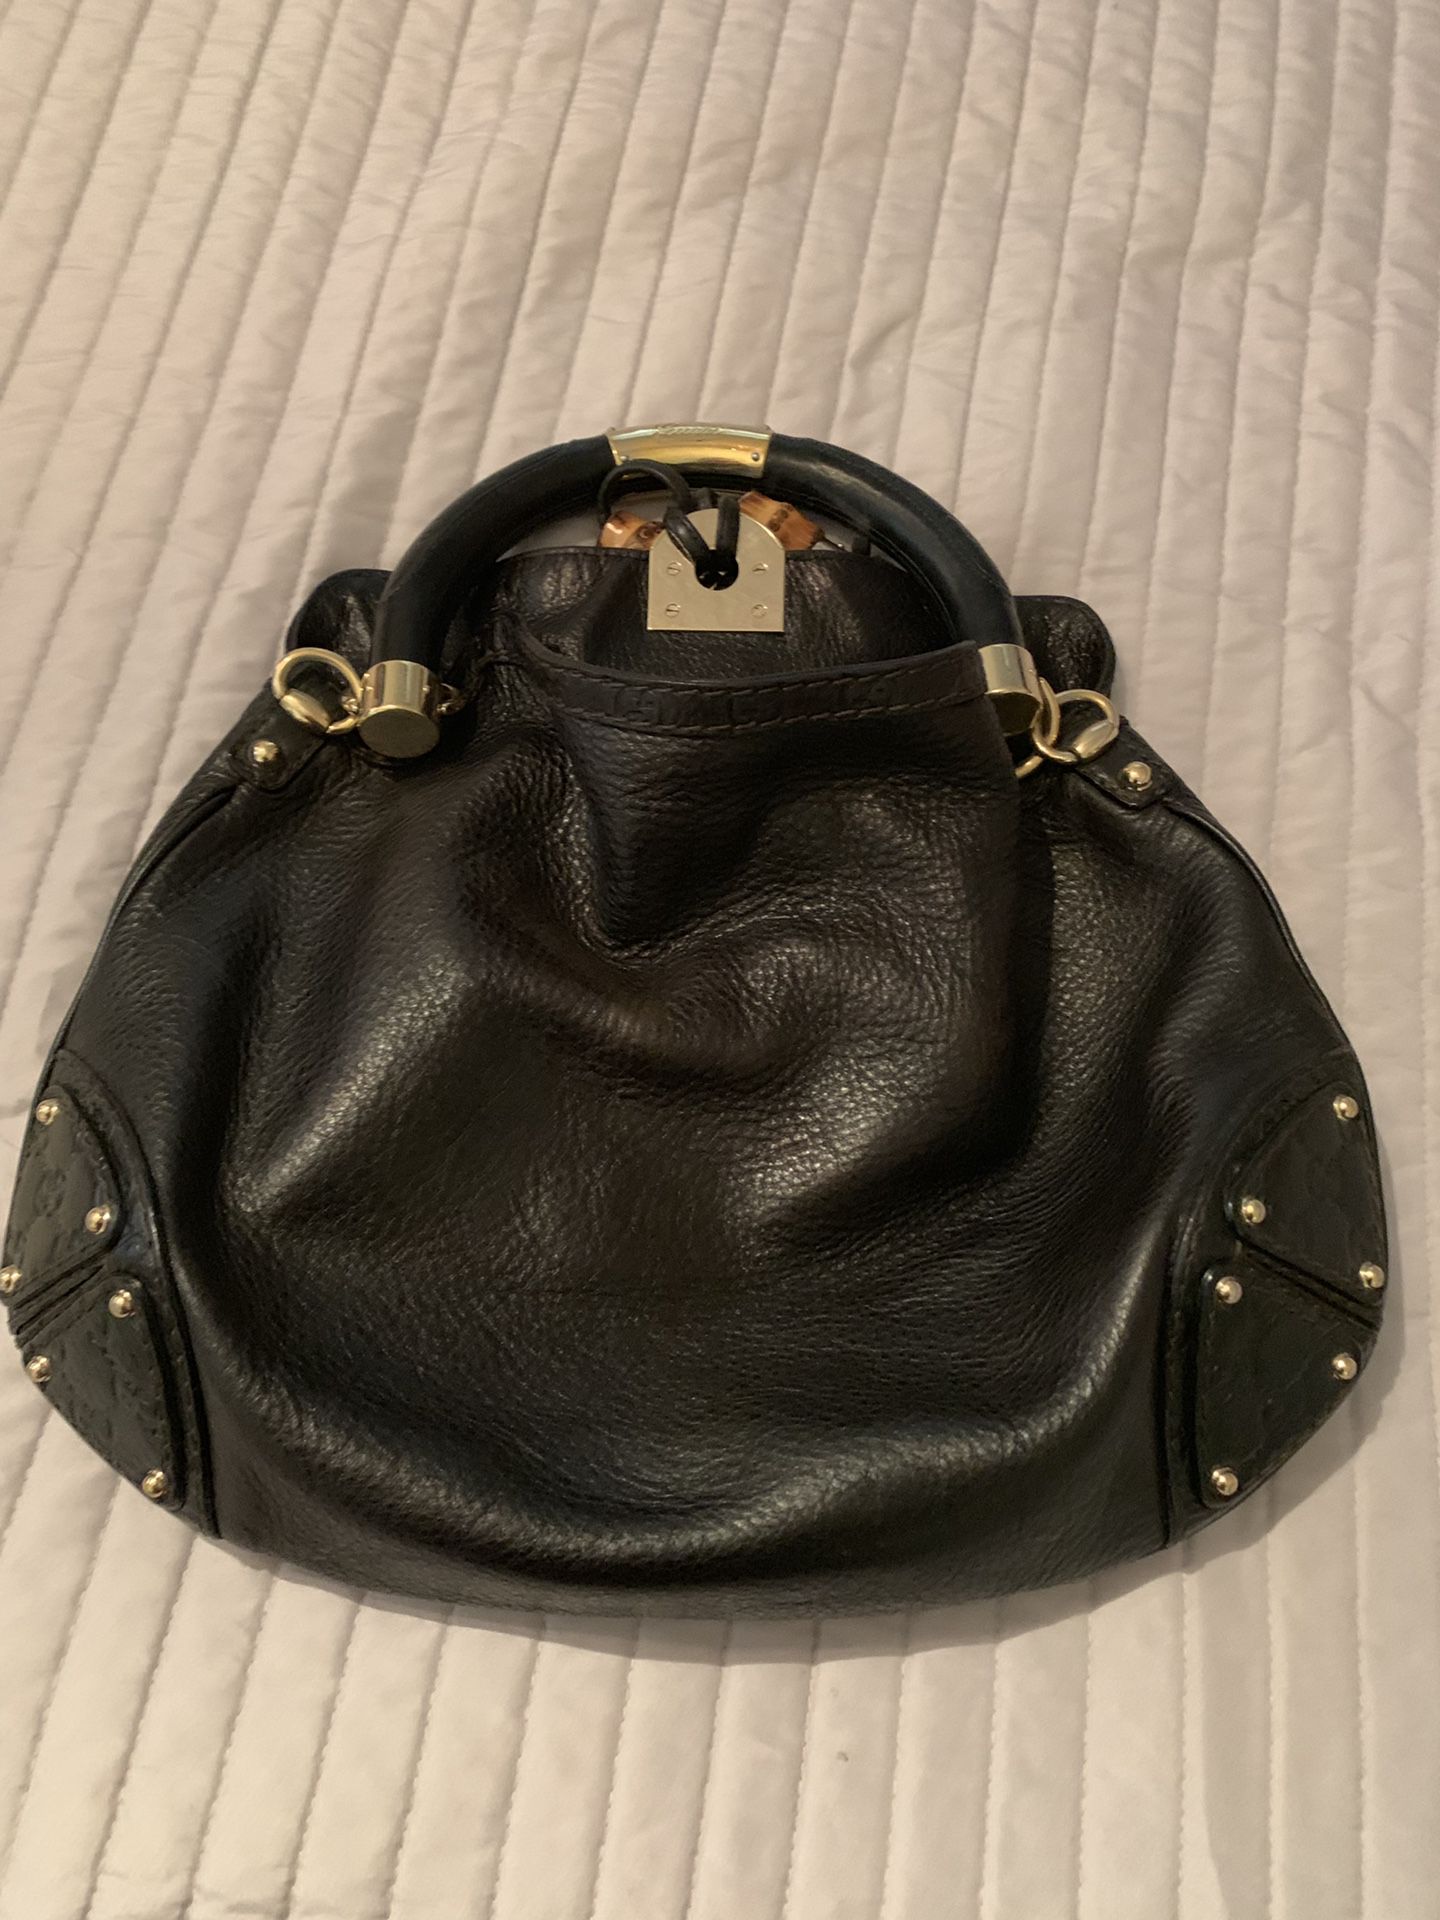 AUTHENTIC GUCCI BLACK LEATHER “INDY” HOBO $2000 retail